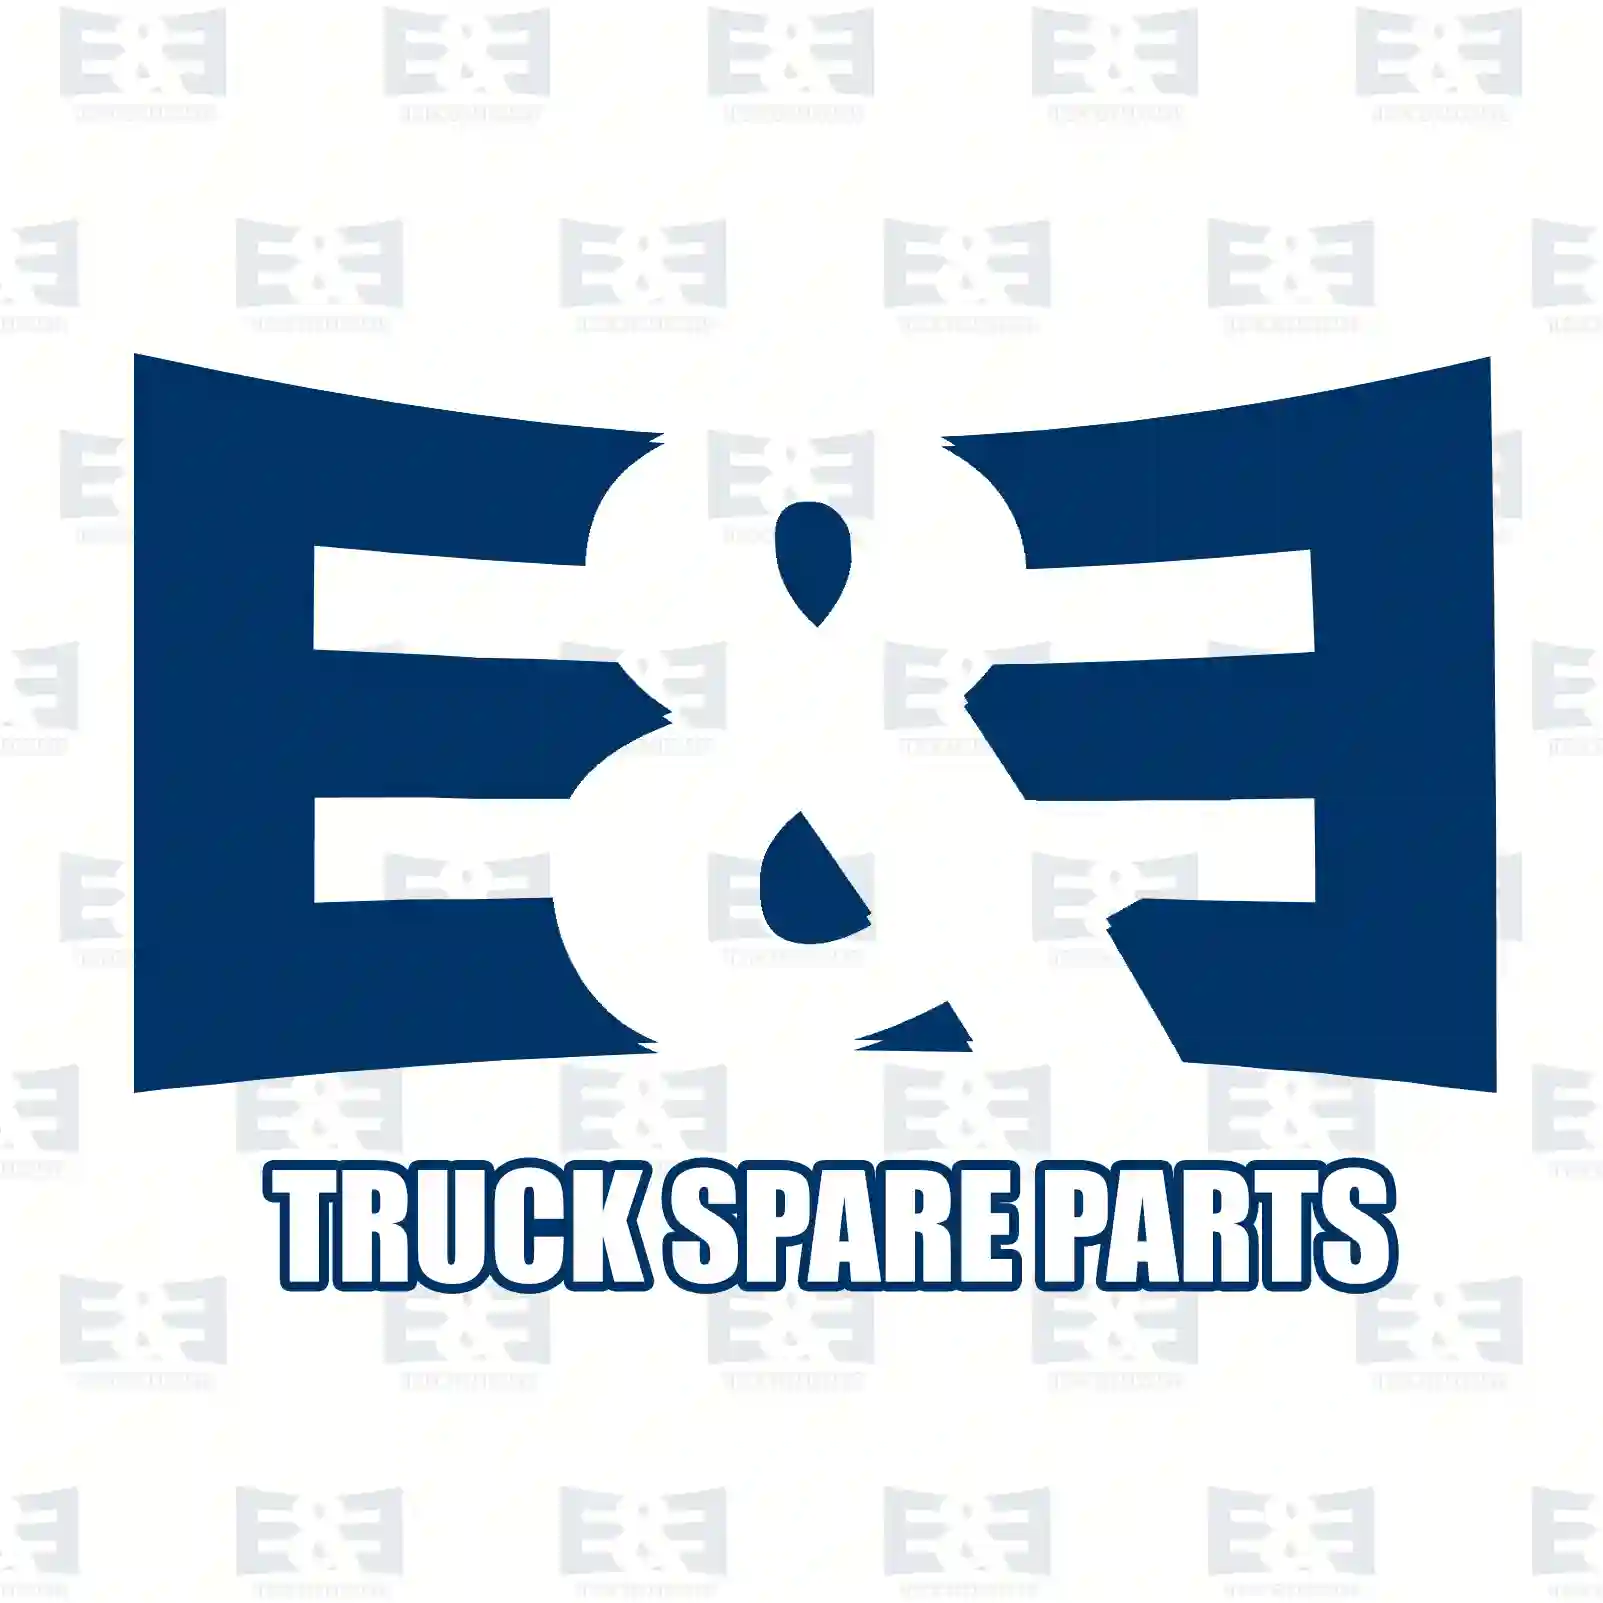  Wheel bearing unit, with screws || E&E Truck Spare Parts | Truck Spare Parts, Auotomotive Spare Parts